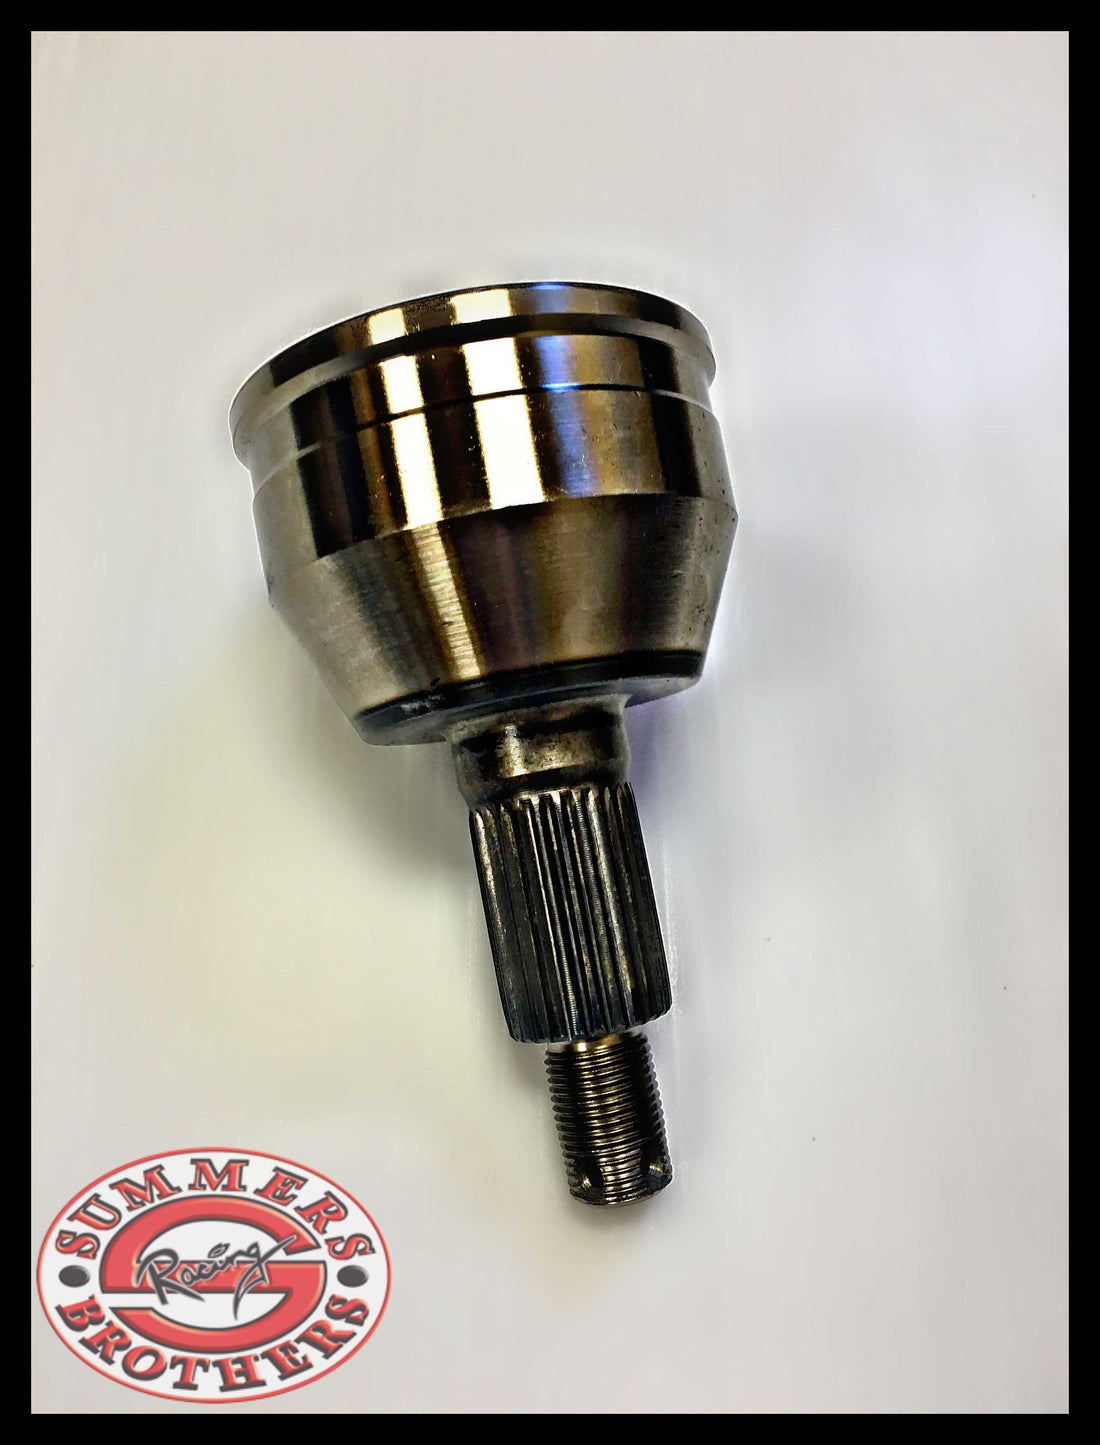 2014-15 XP-1000 REAR OUTER CV JOINT